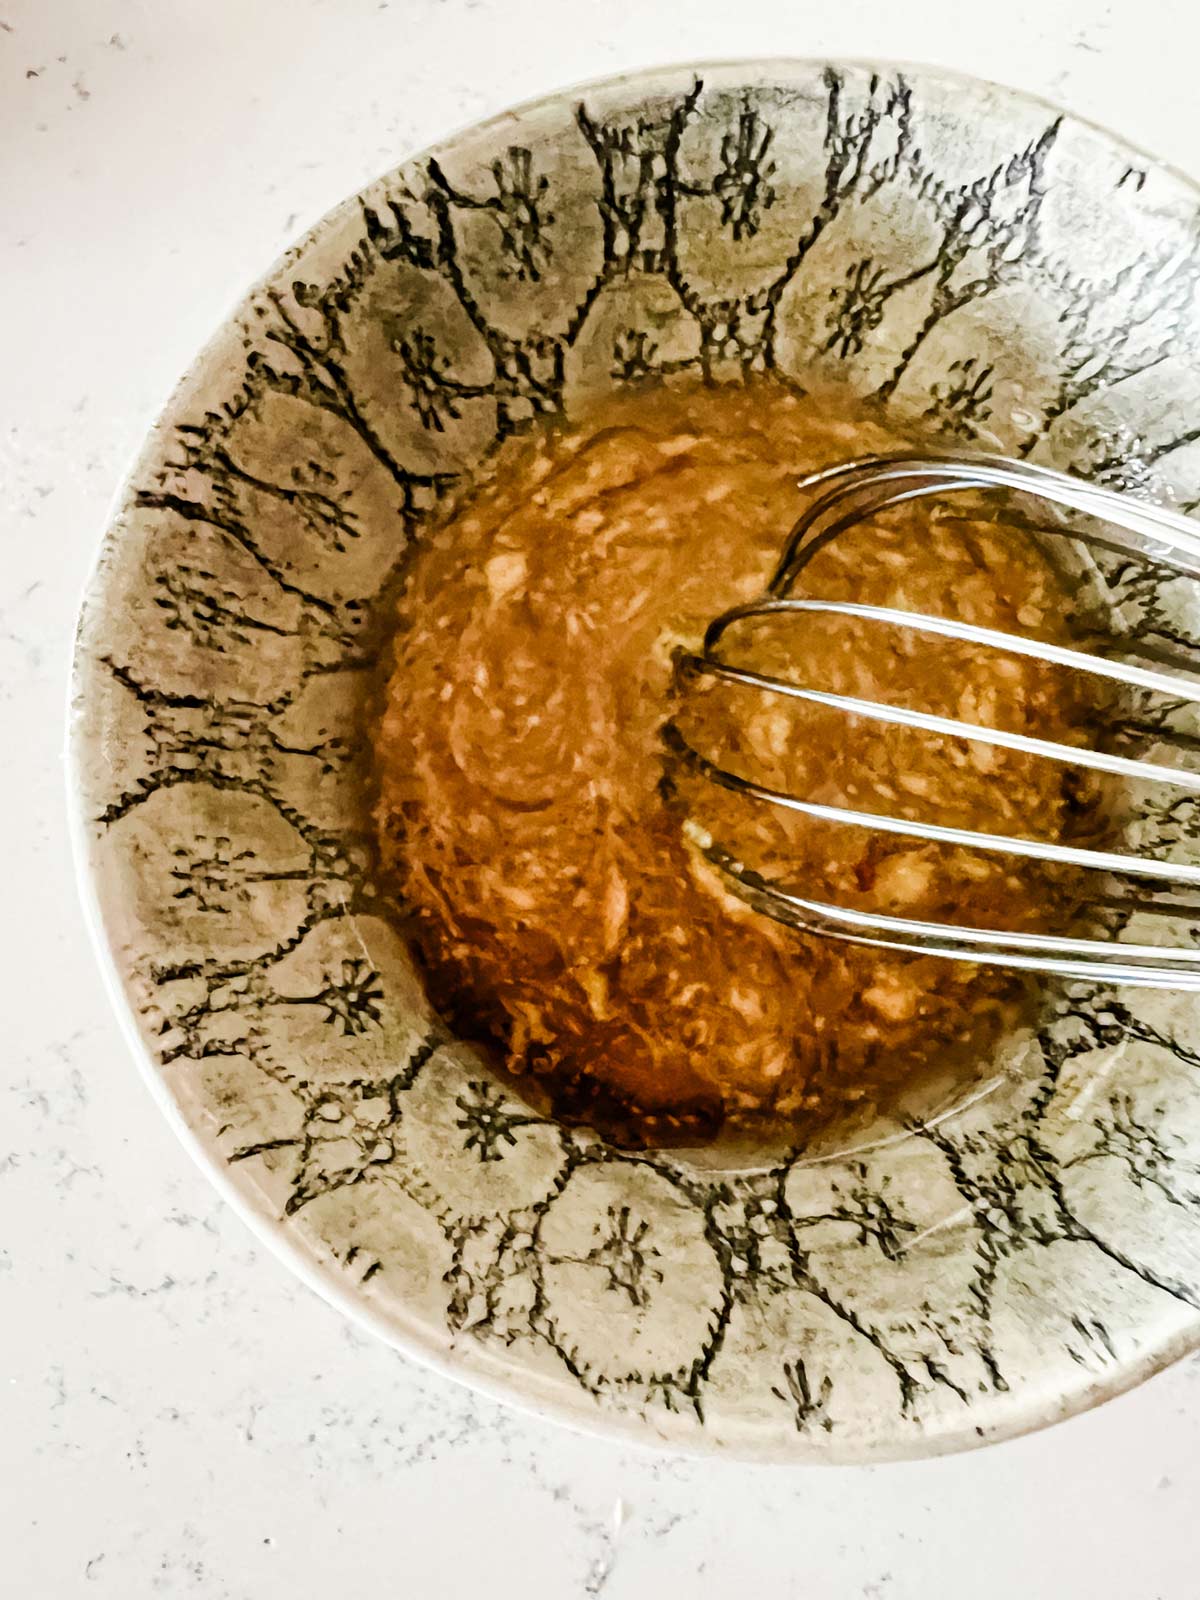 Oil, maple syrup, dijon mustard, and seasonings being whisked together in a small bowl.